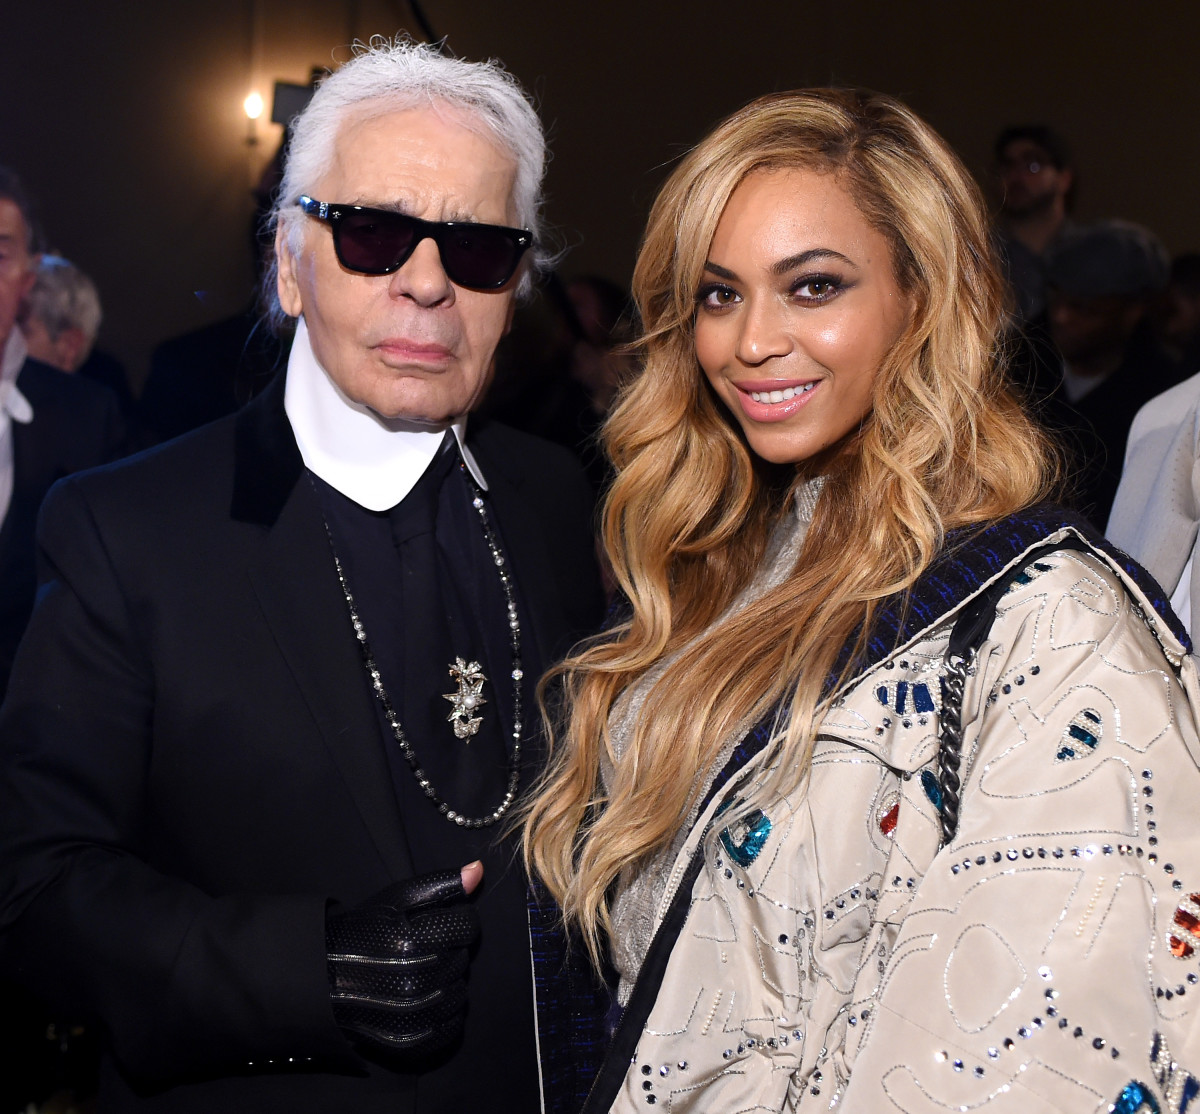 Karl Lagerfeld and Beyonce at the Chanel Metiers d'Art show in New York City. Photo: Stefanie Keenan/Getty Images